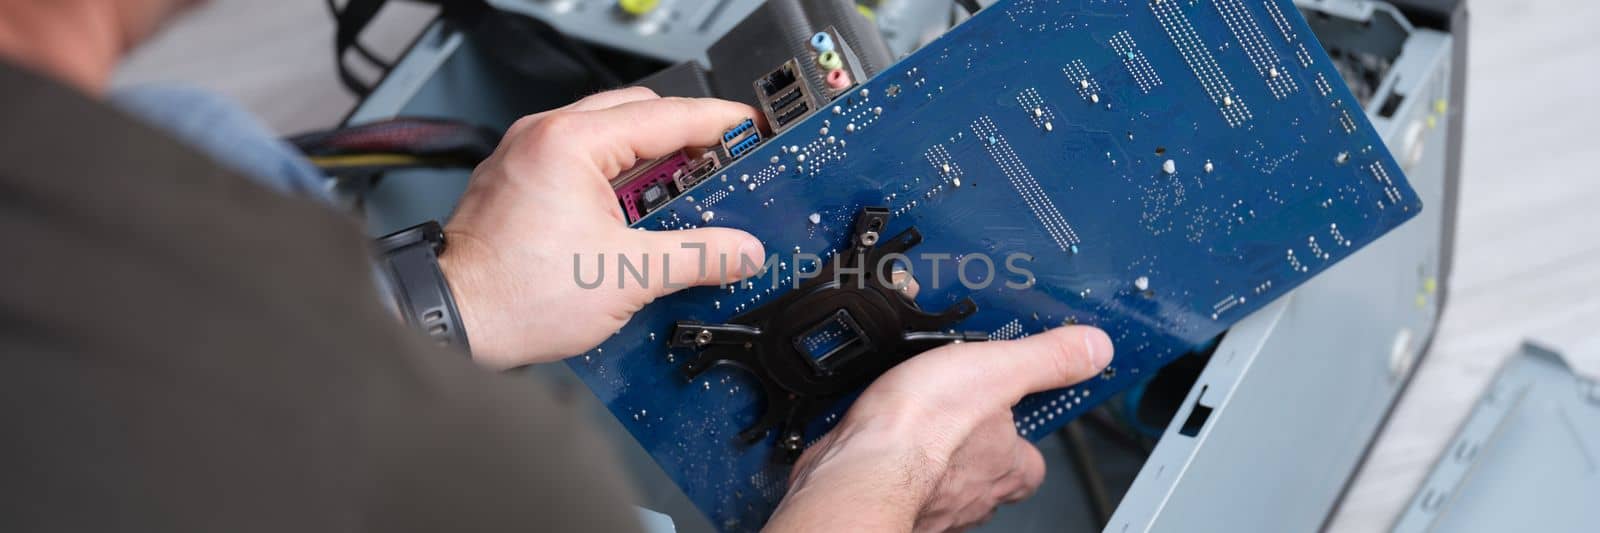 Computer repair, personal computer assembly and PC assembly by kuprevich